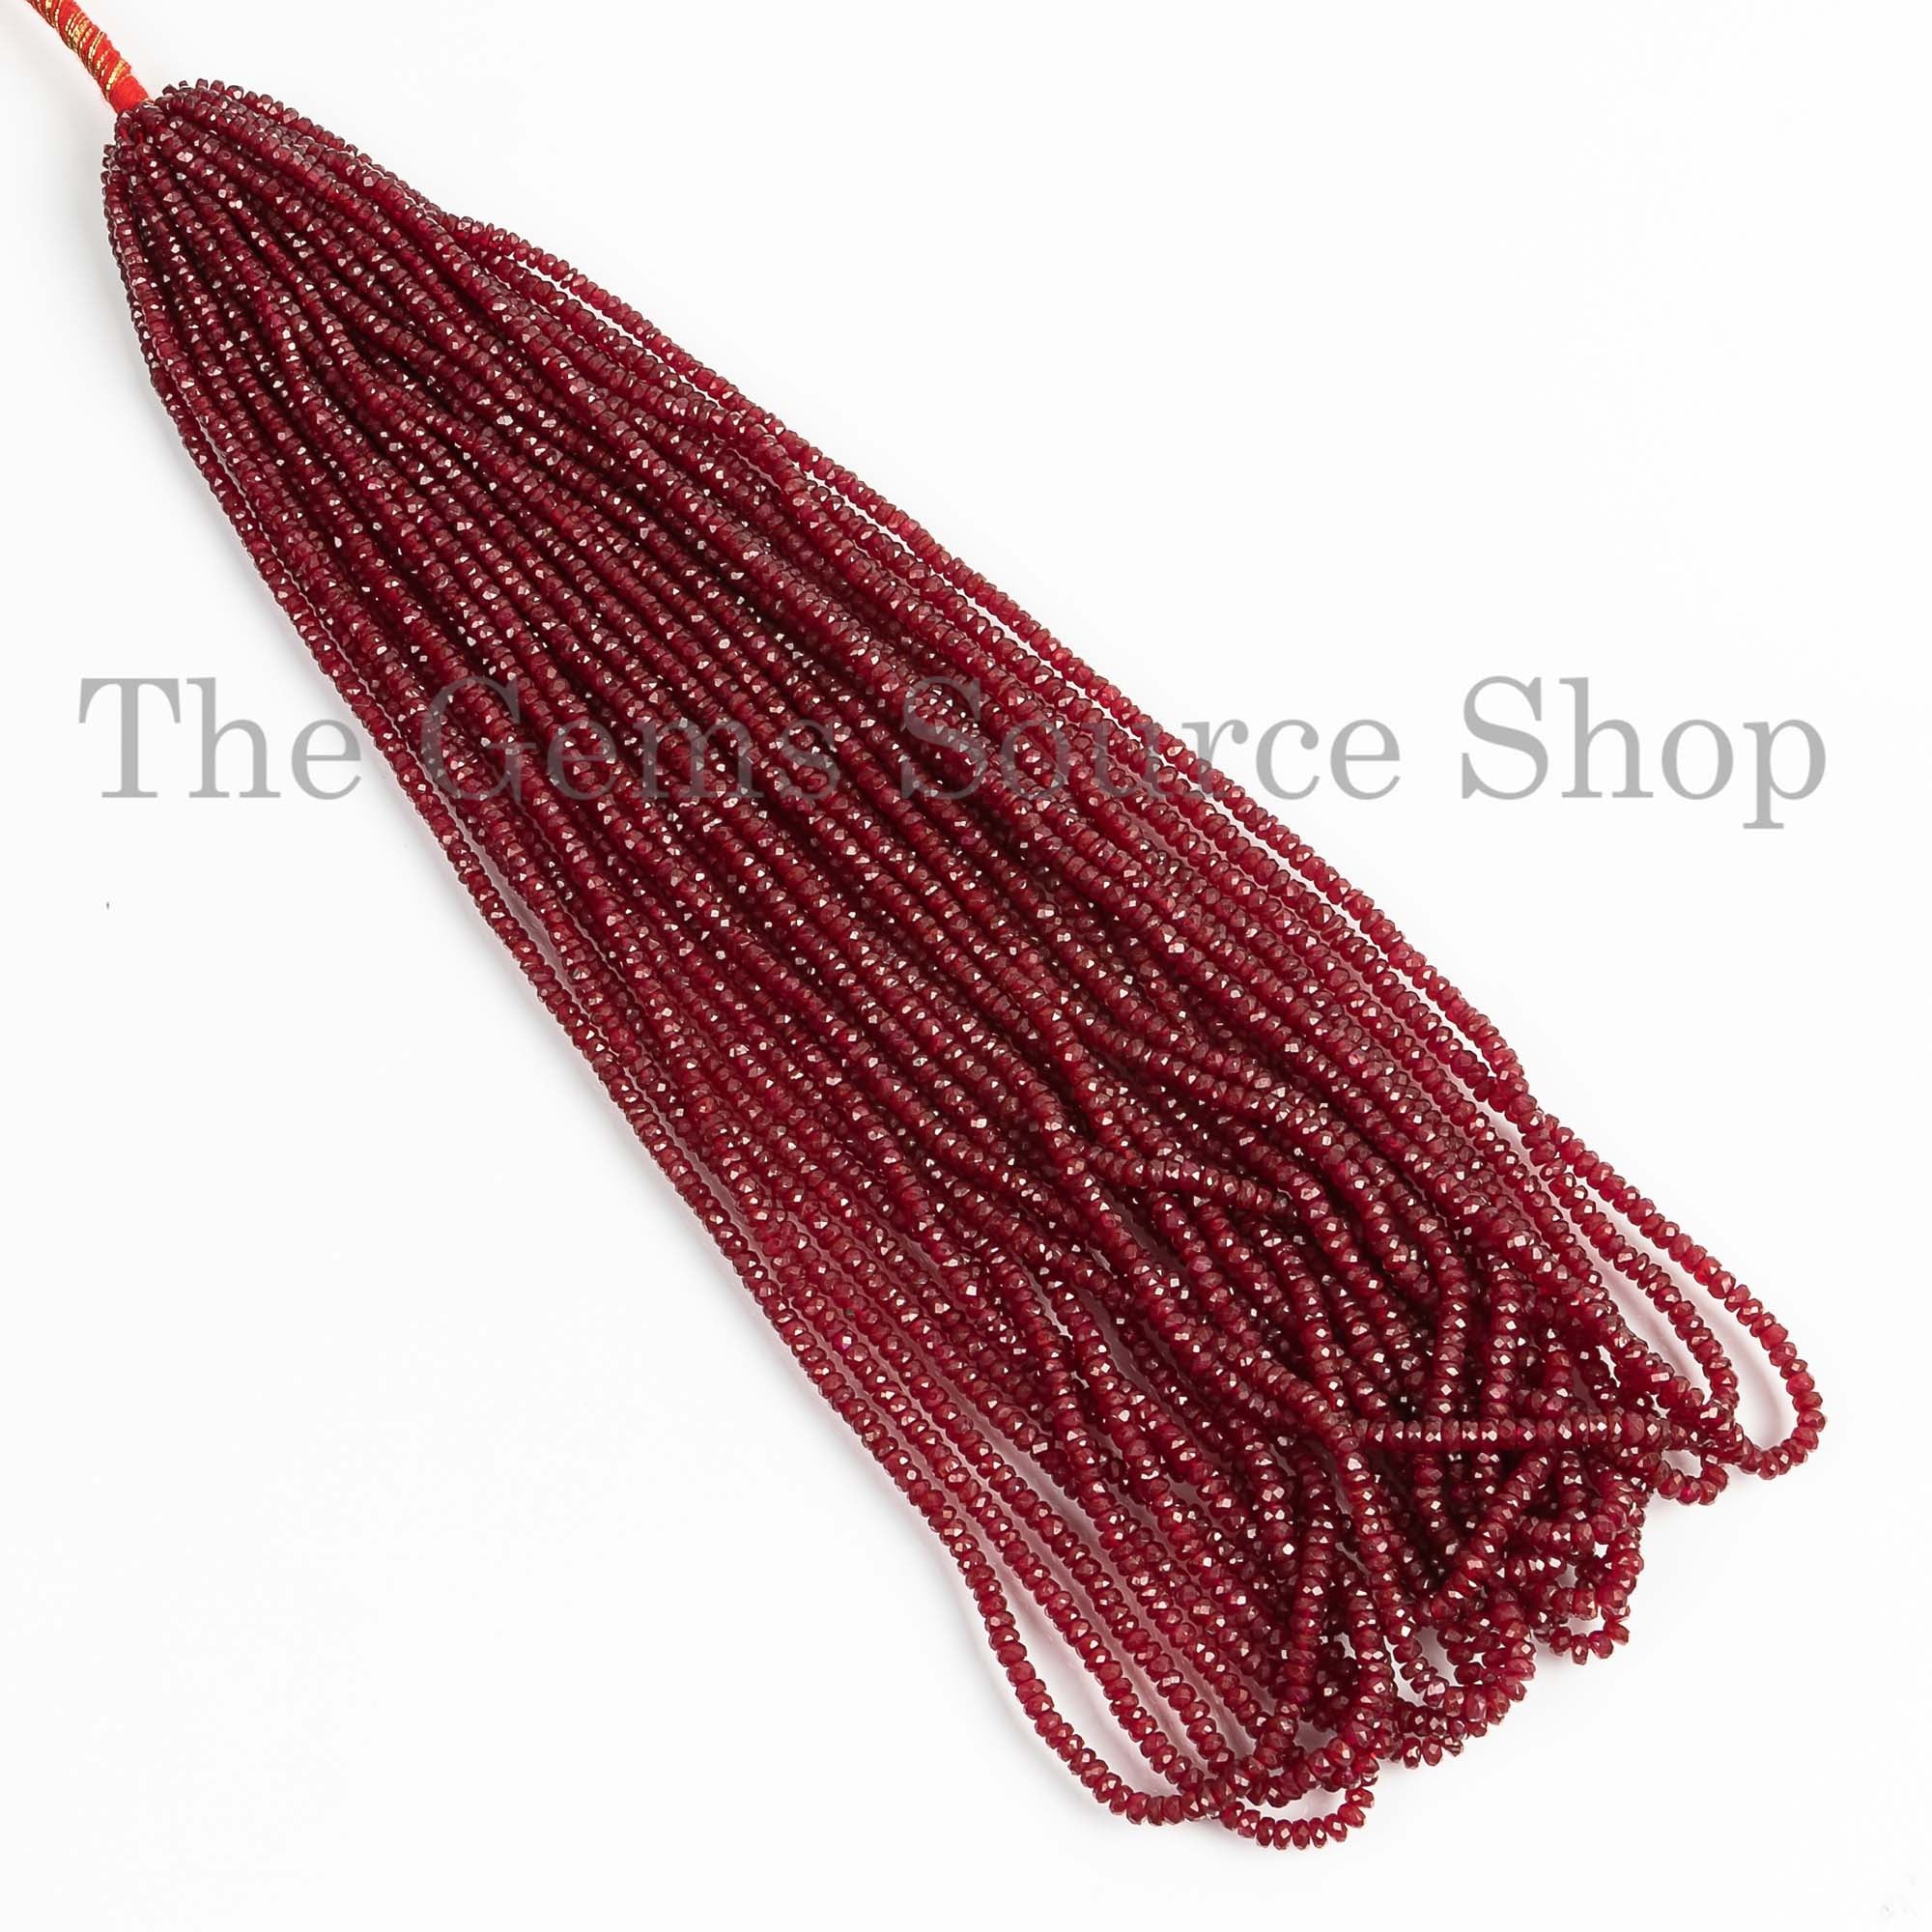 2.5-3mm Natural Ruby Faceted Beads, Ruby Rondelle Shape Beads, Ruby Briolette Beads, Ruby Beads, Jewelry Making Beads